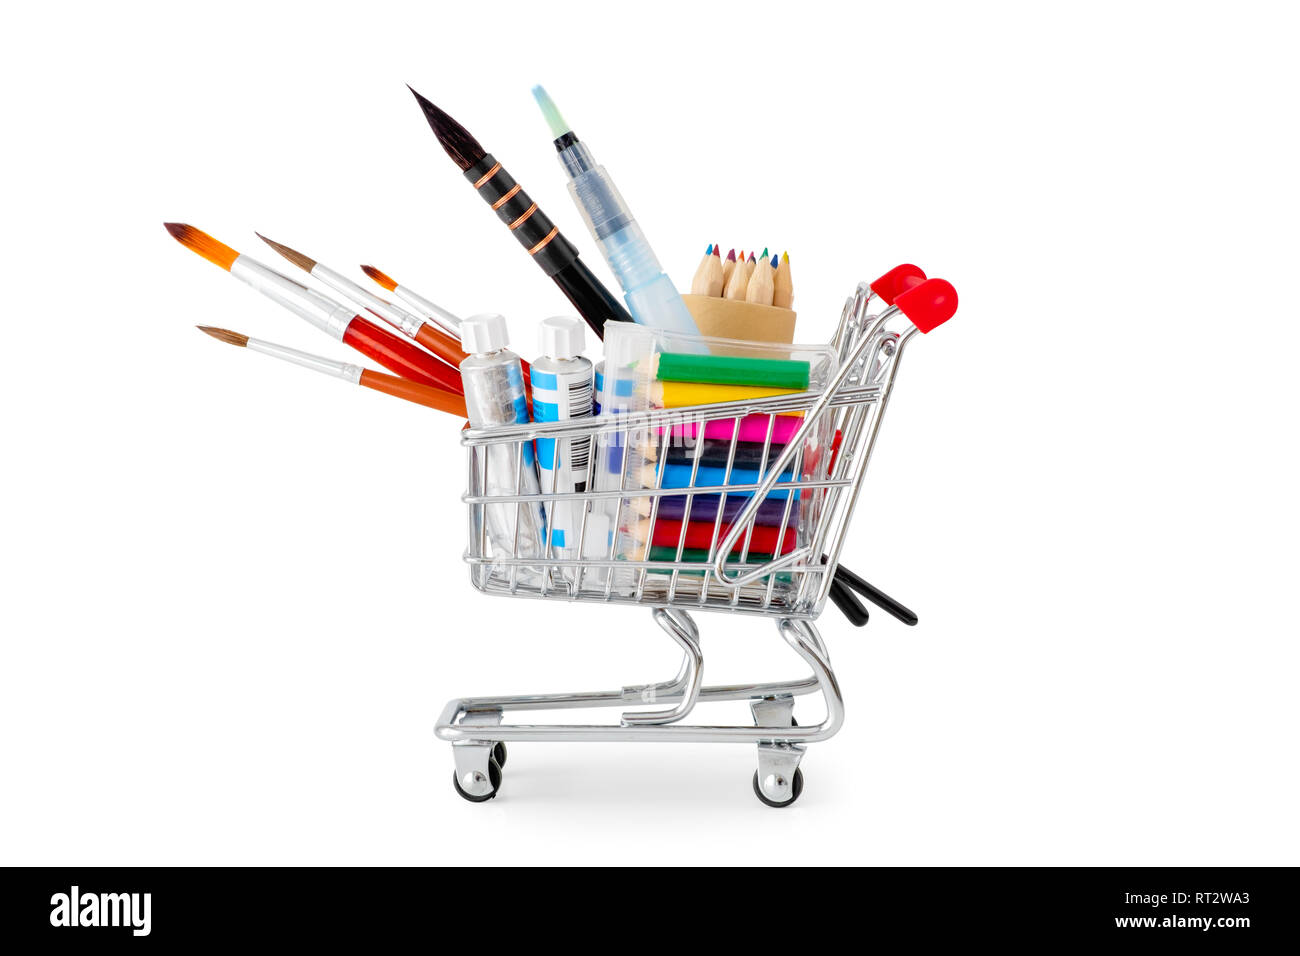 Mini shopping cart full with artistic goods for drawing on white background. Stock Photo